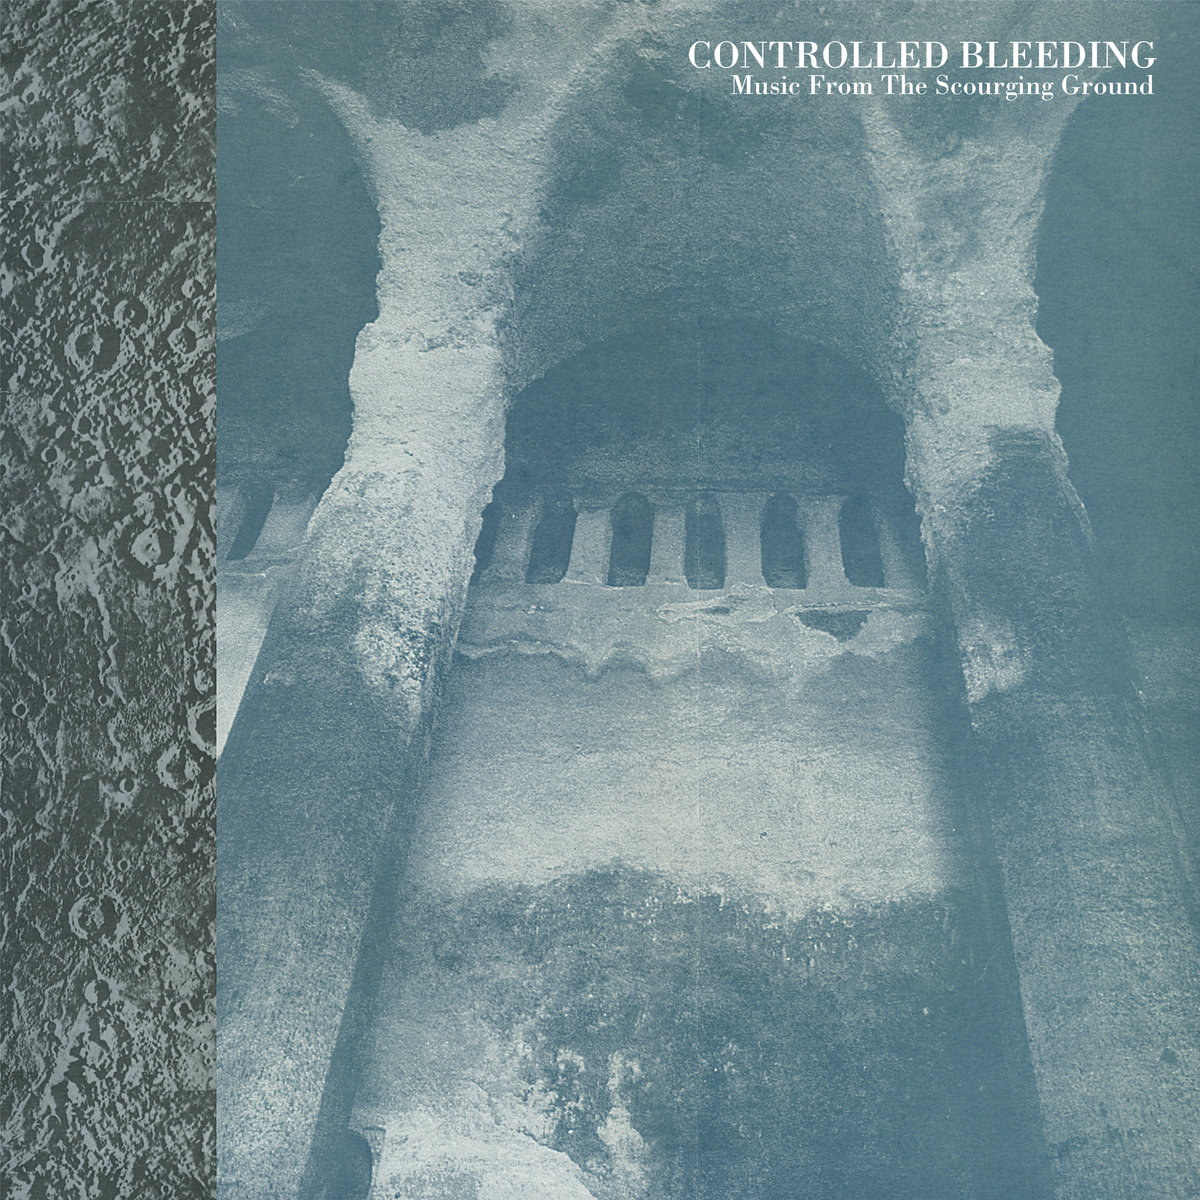 Controlled Bleeding's Entire Discography On Bandcamp Free This Week!